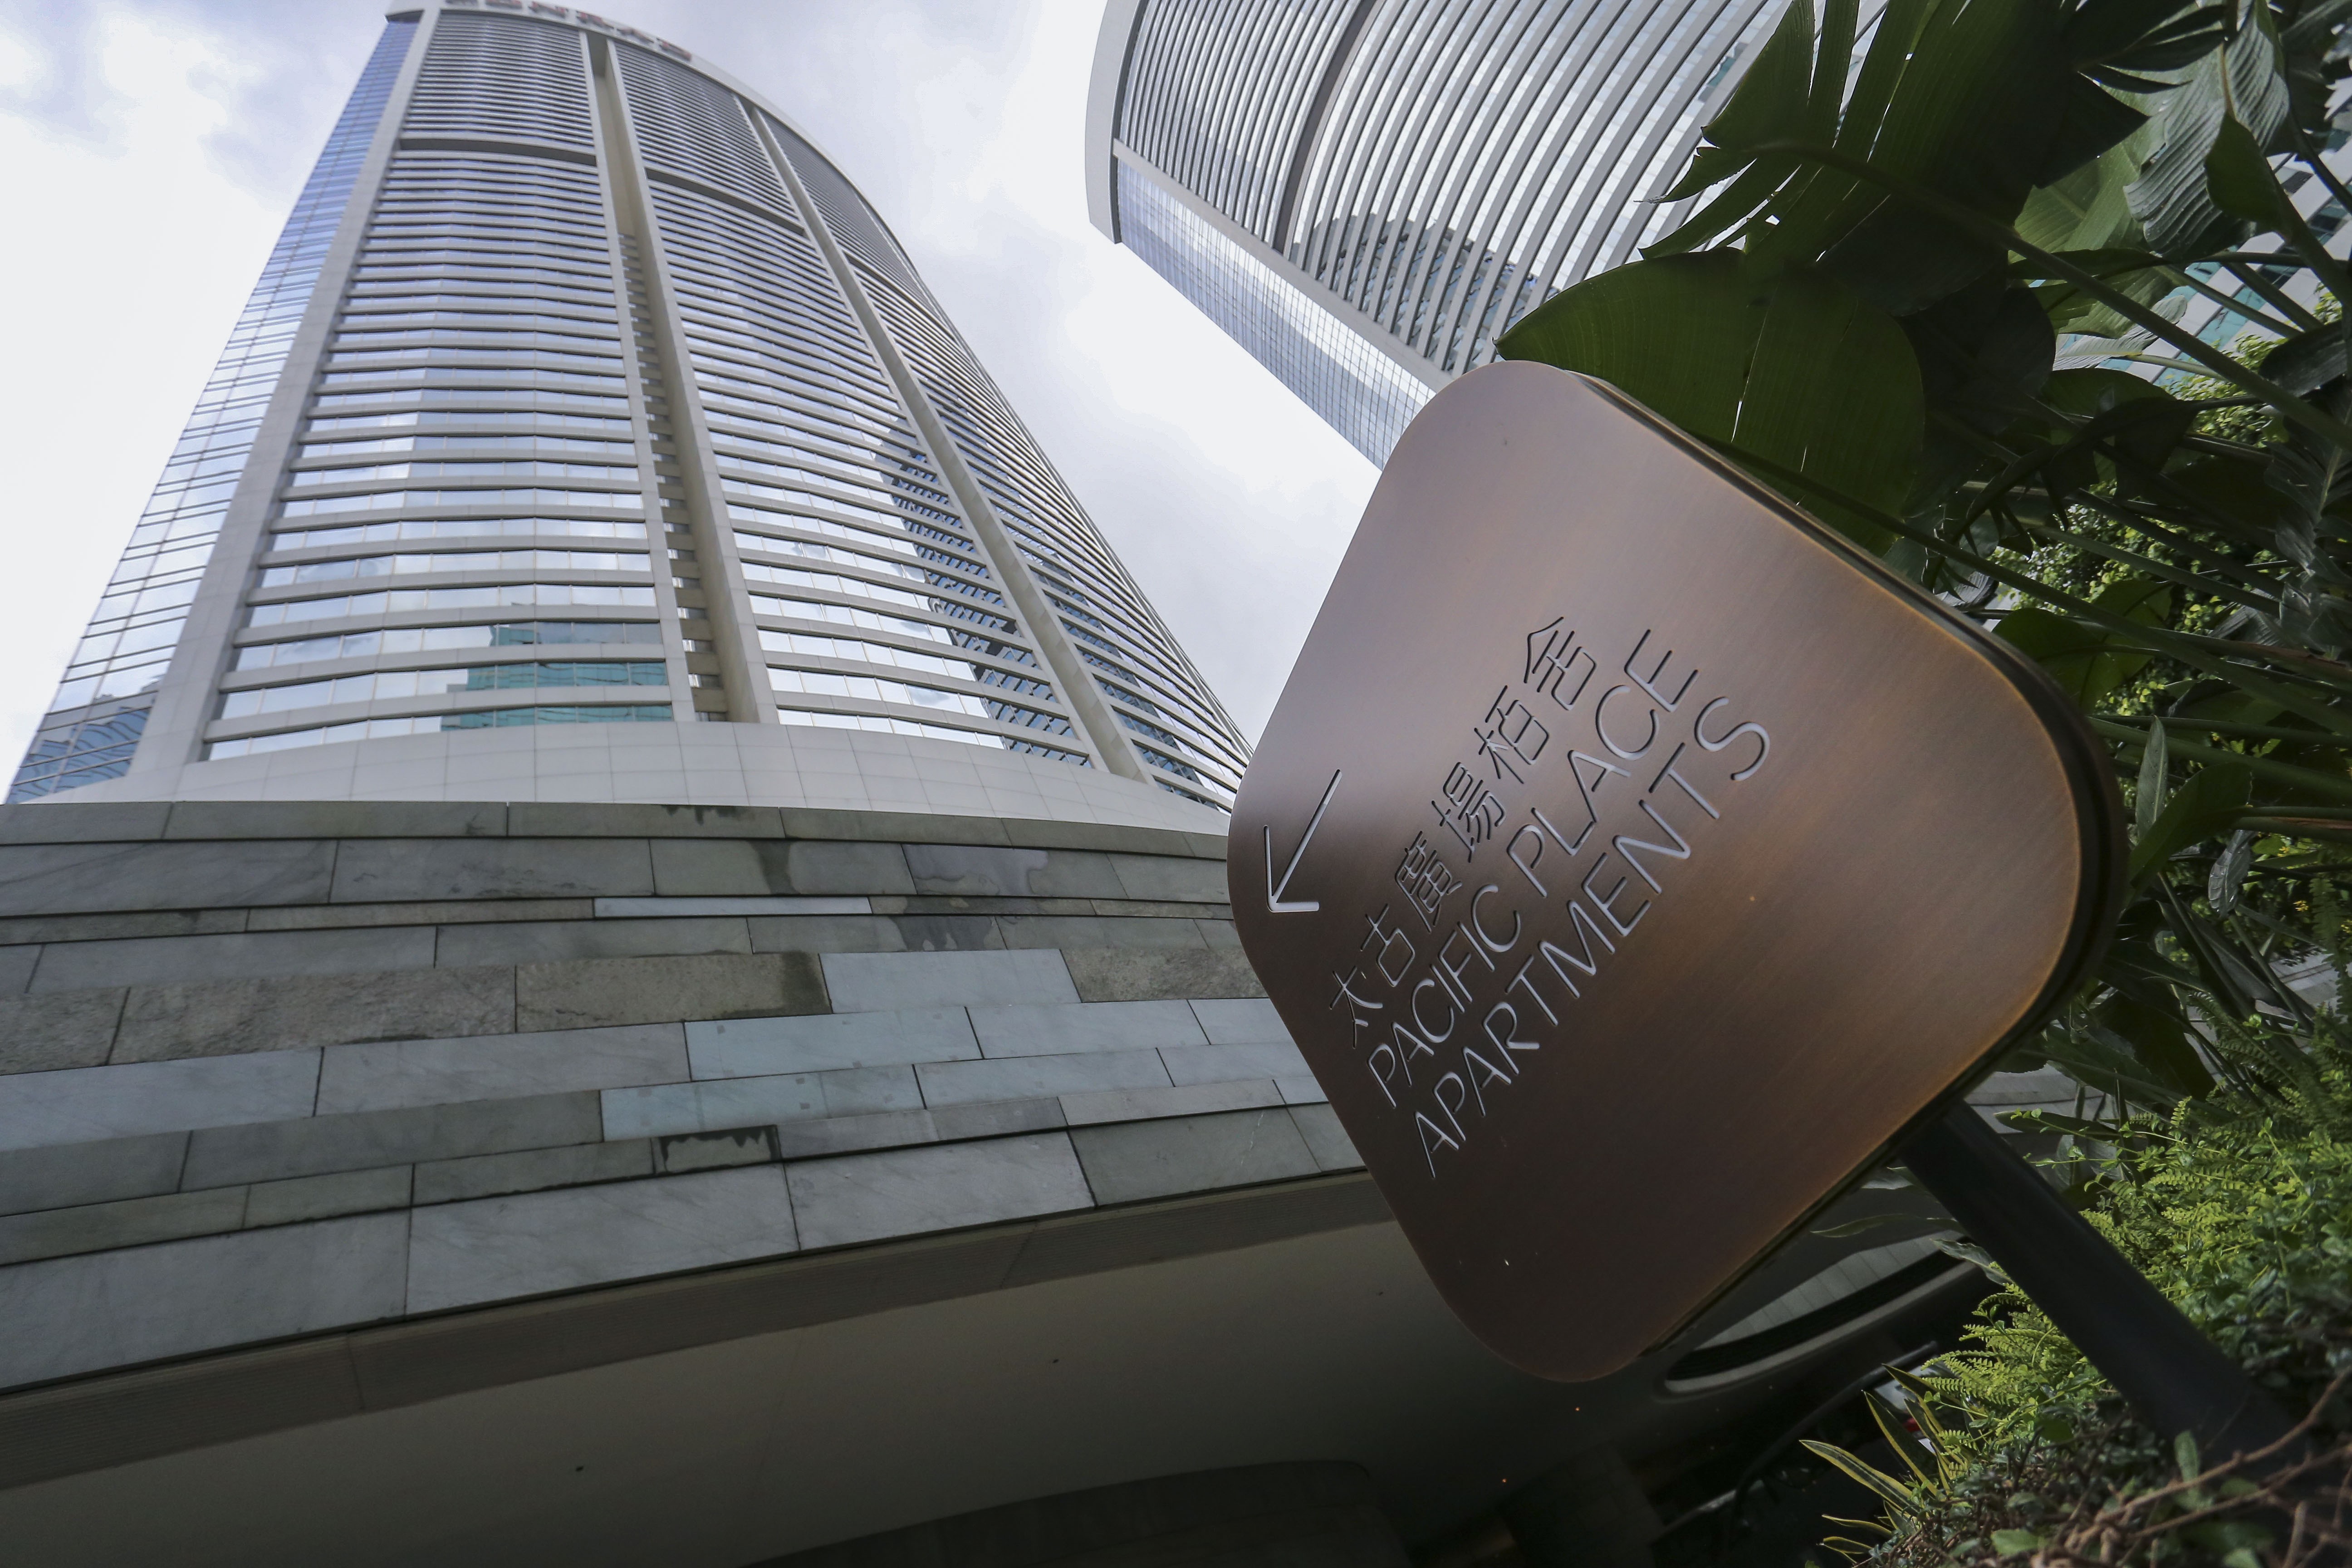 Serviced flats like the ones at Pacific Place Apartments in Admiralty have become a popular choice with young executives coming to work in Hong Kong. Photo: Dickson Lee